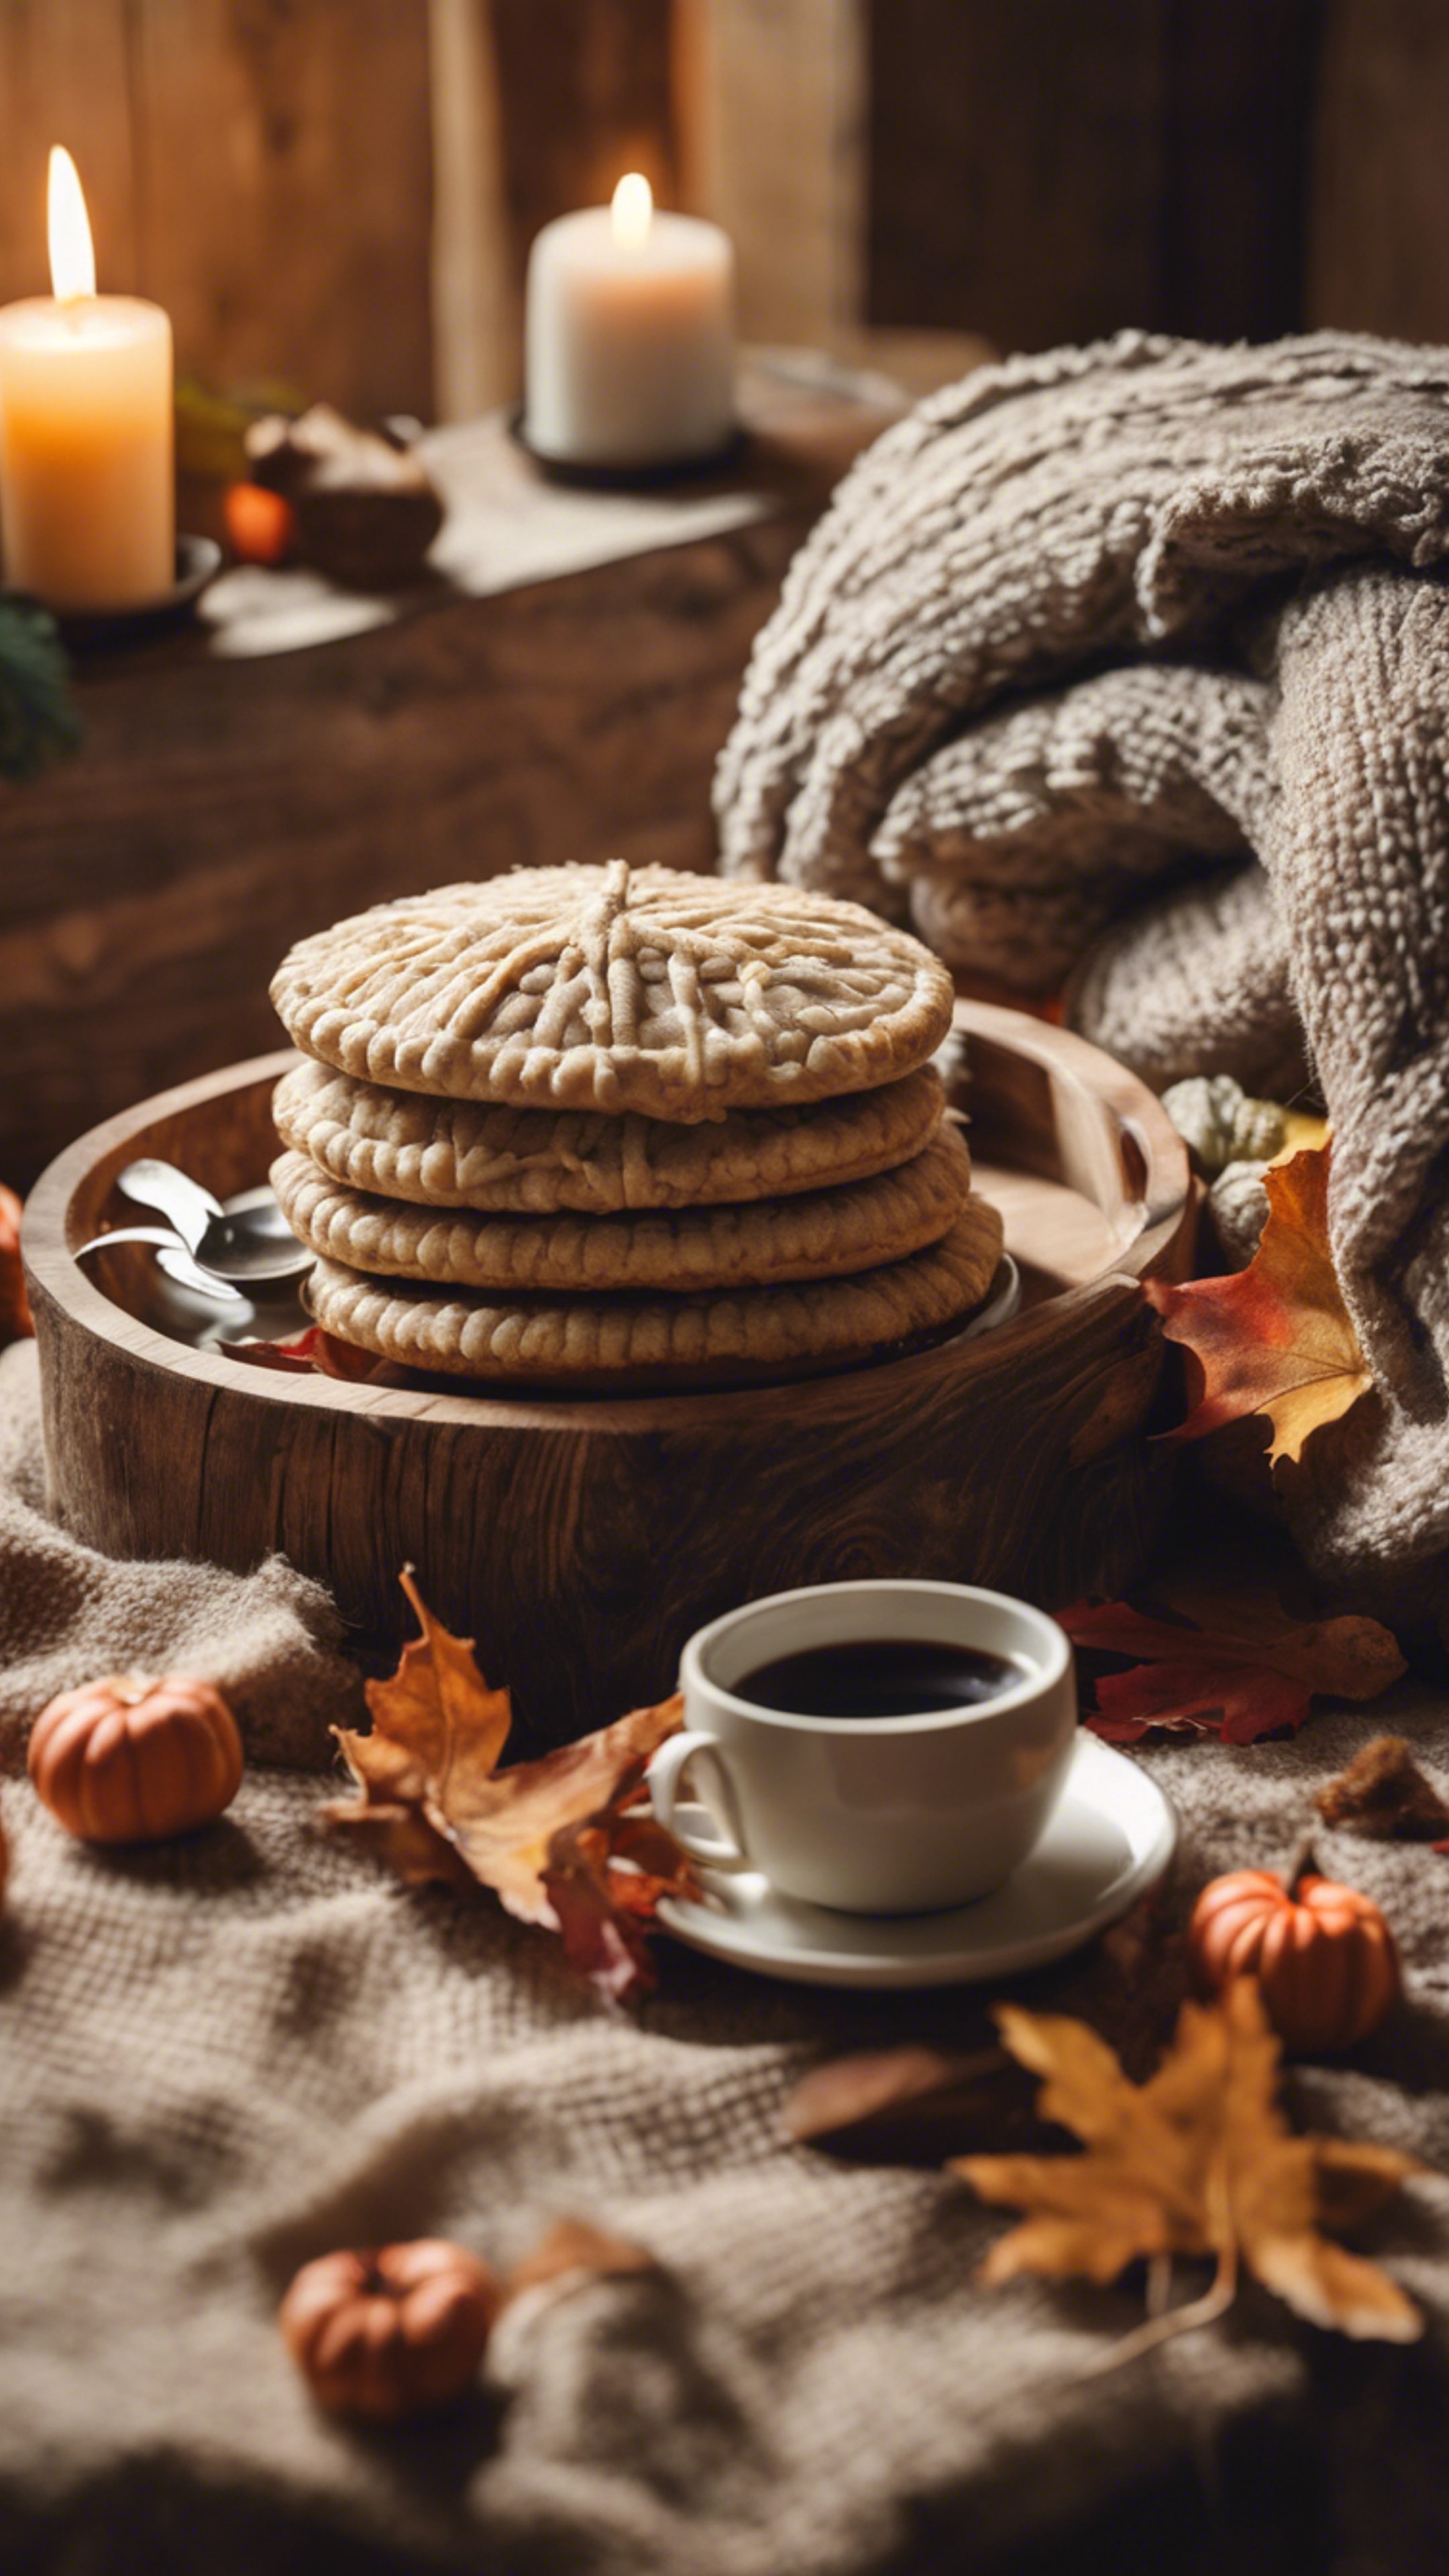 Hand-knitted autumn-themed blankets and comfy pillows surrounding a rustic wooden coffee table stacked with classic Thanksgiving pies. Wallpaper[4d7edbdc162840db88e7]